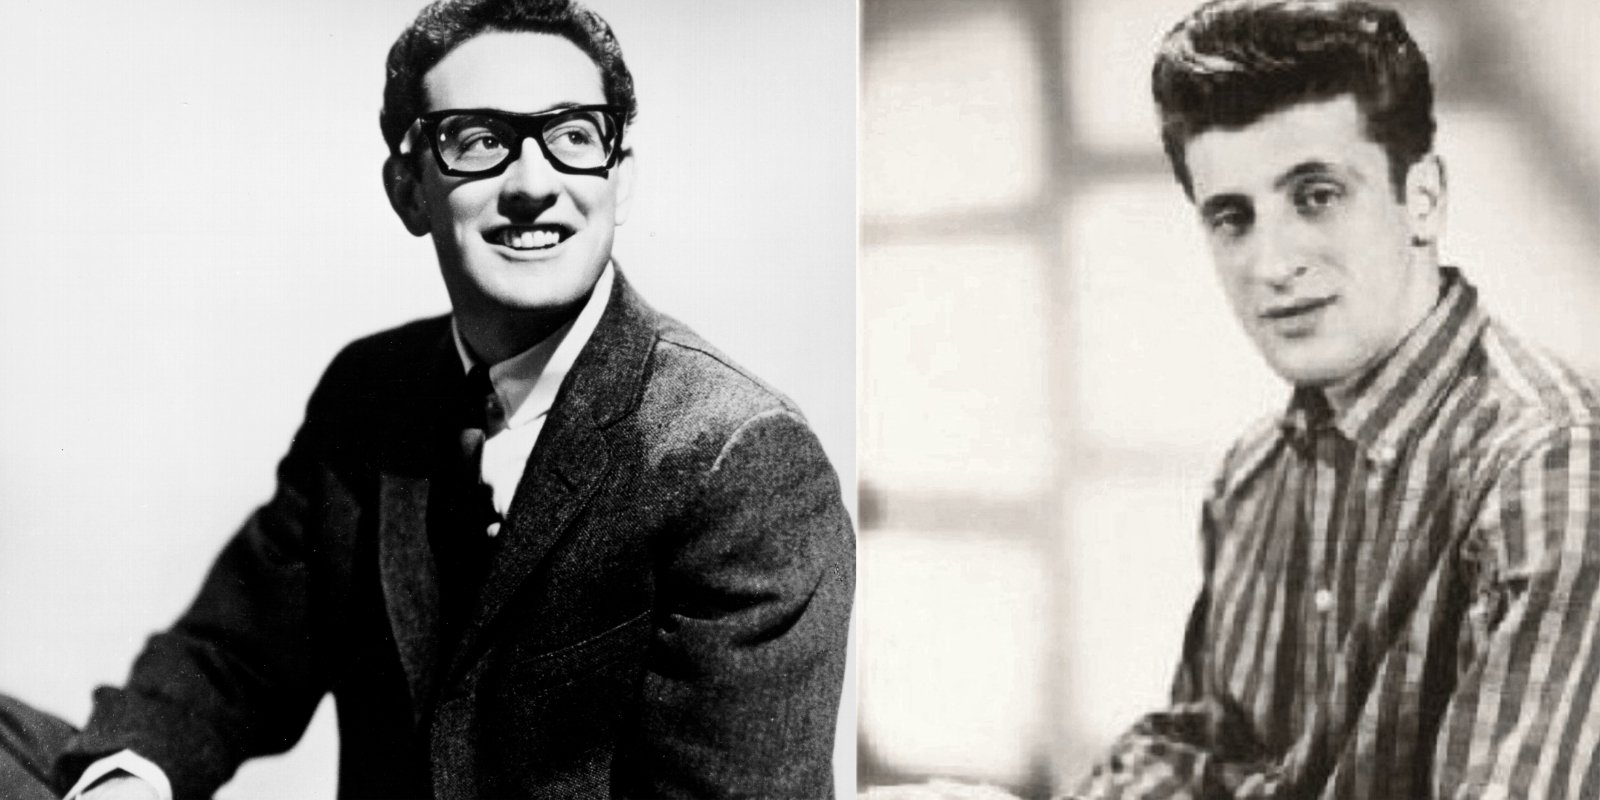 Buddy Holly and Lou Giordano in side by side photographs.